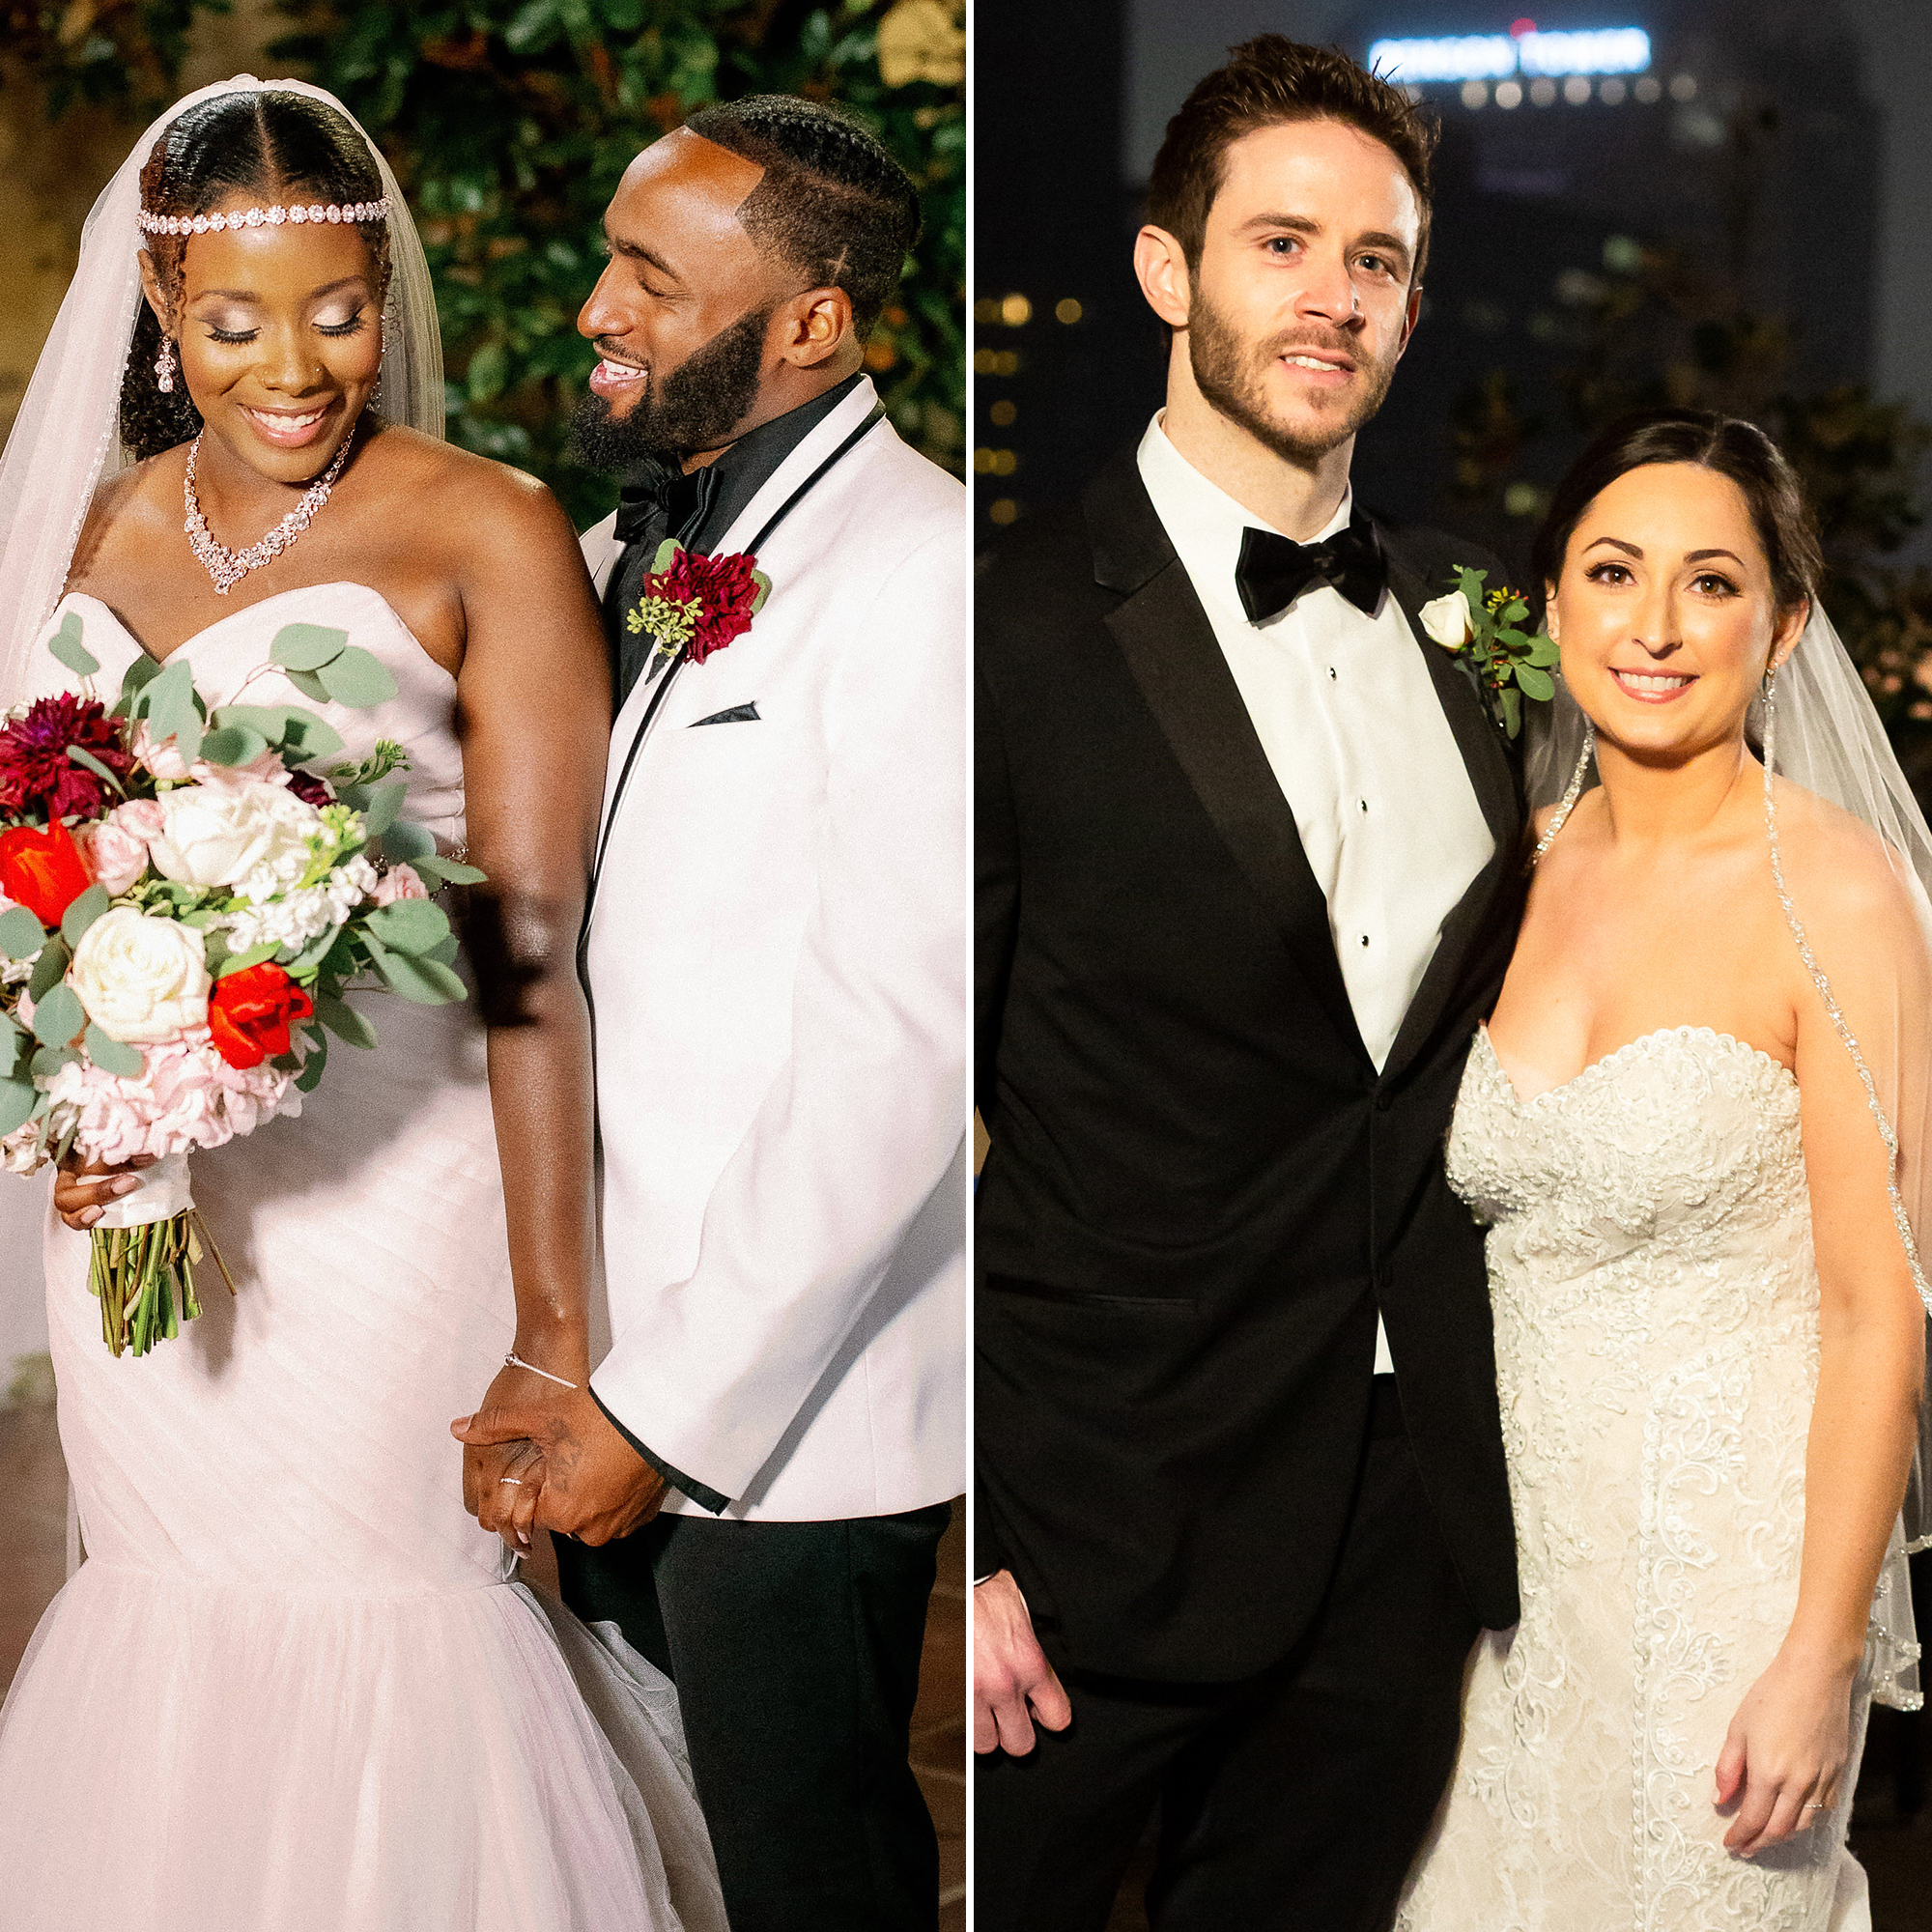 Married at First Sight' Season 11 Cast: Meet the Couples